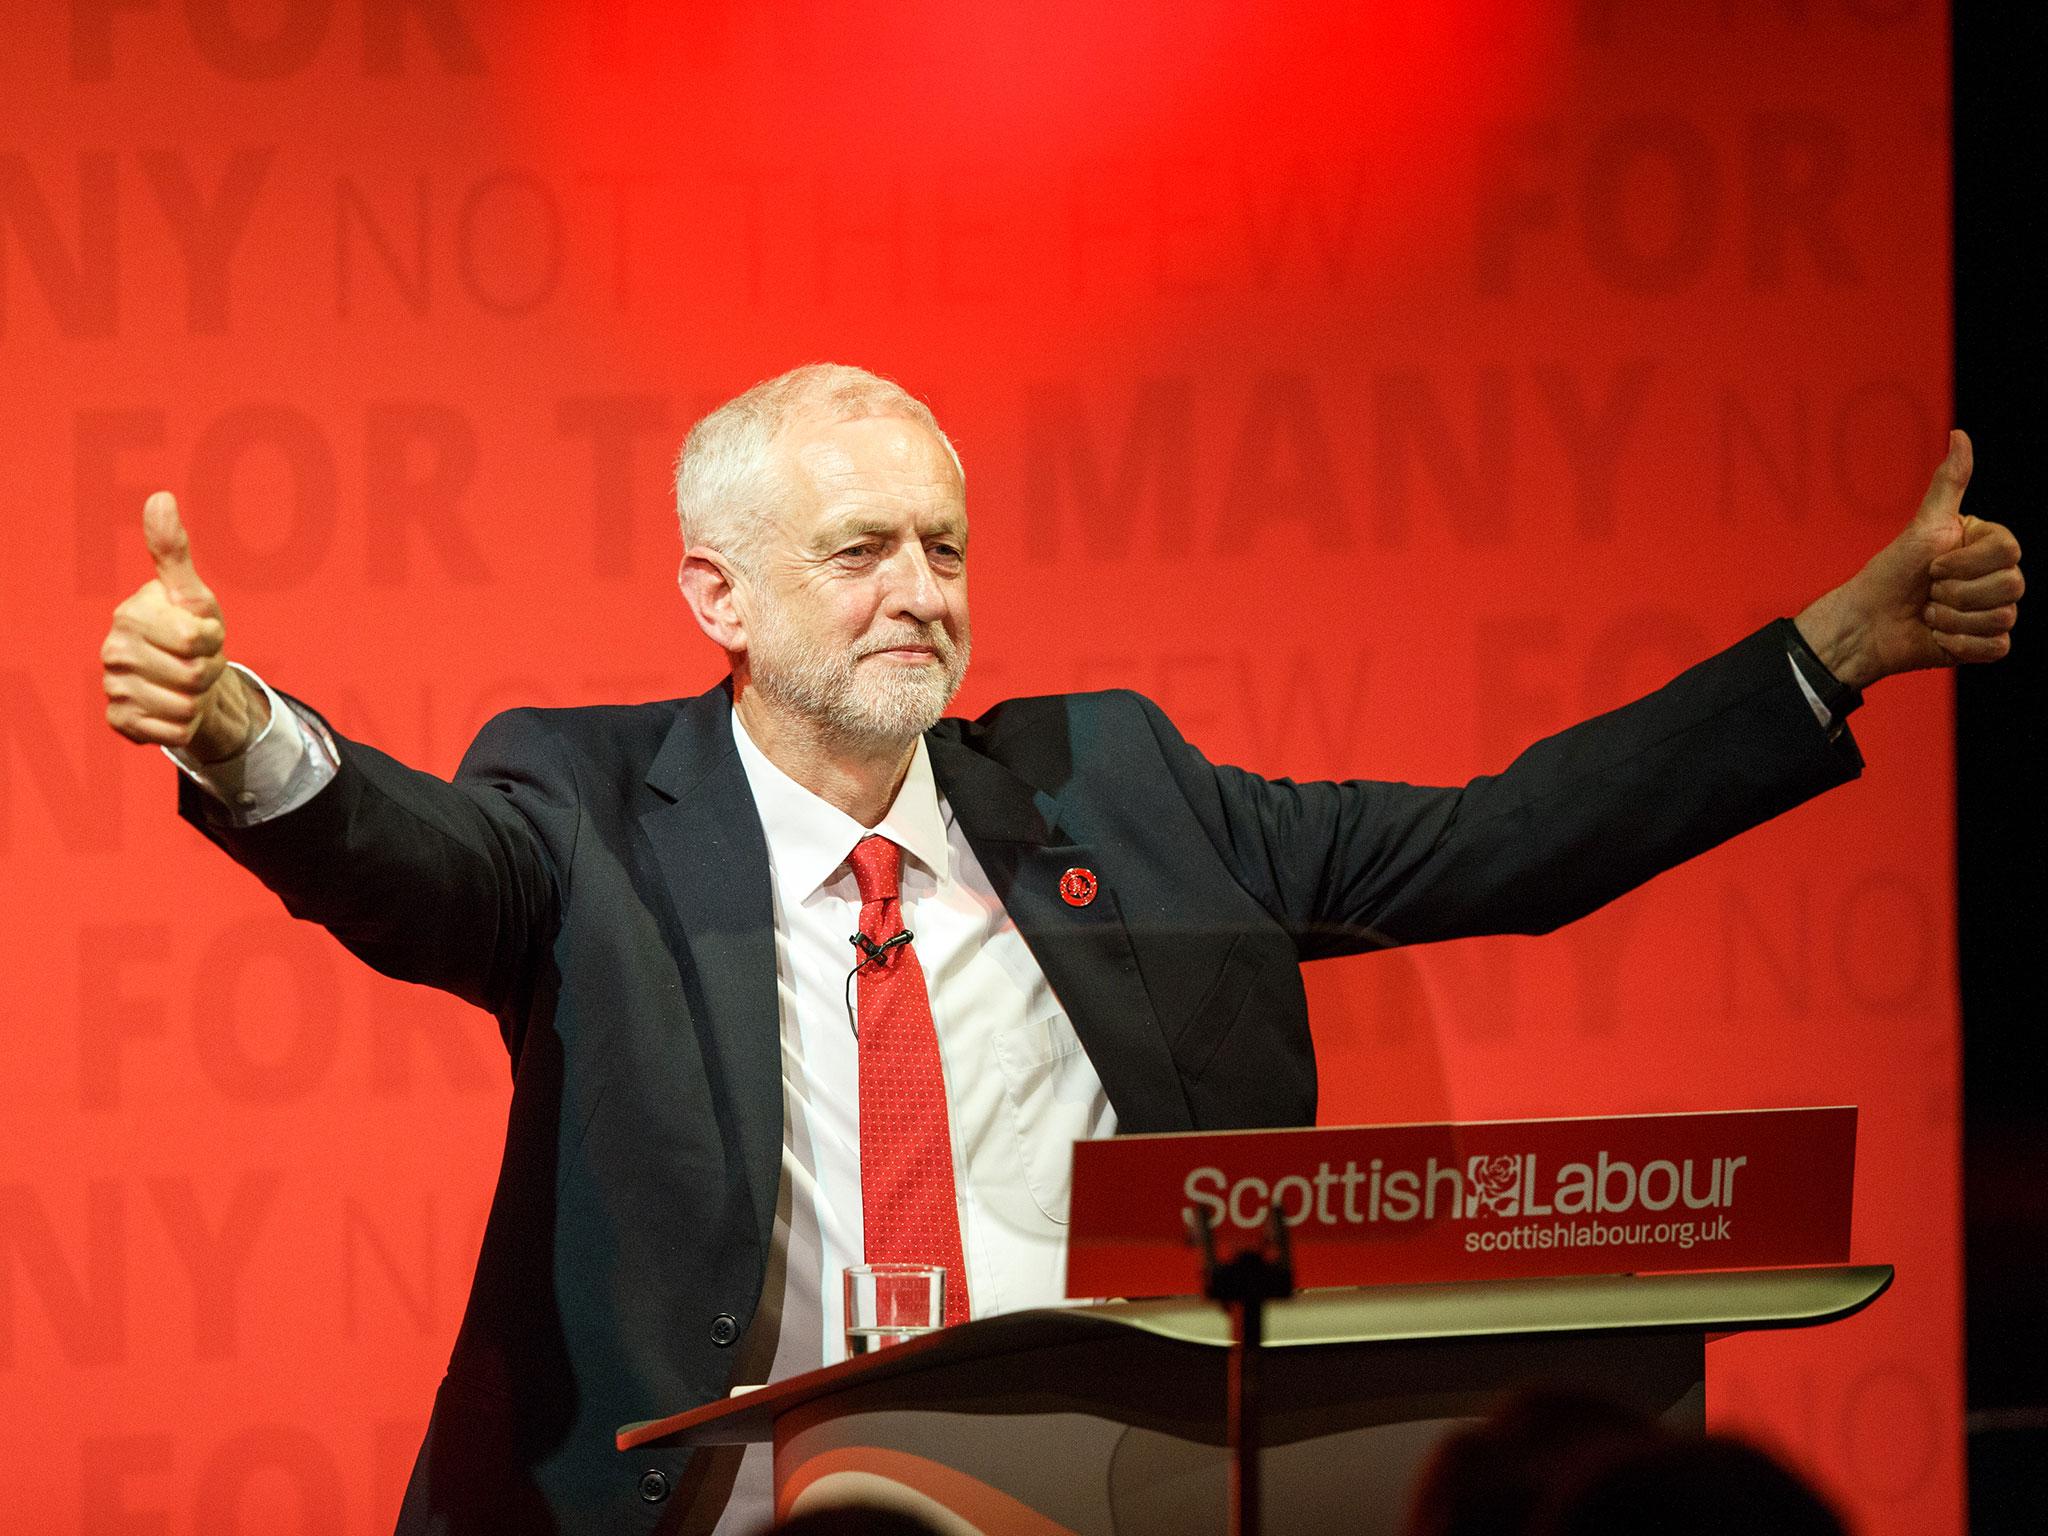 Jeremy Corbyn, the Labour leader, hosts a general election rally at the Old Fruitmarket, Candleriggs, in Glasgow, Scotland